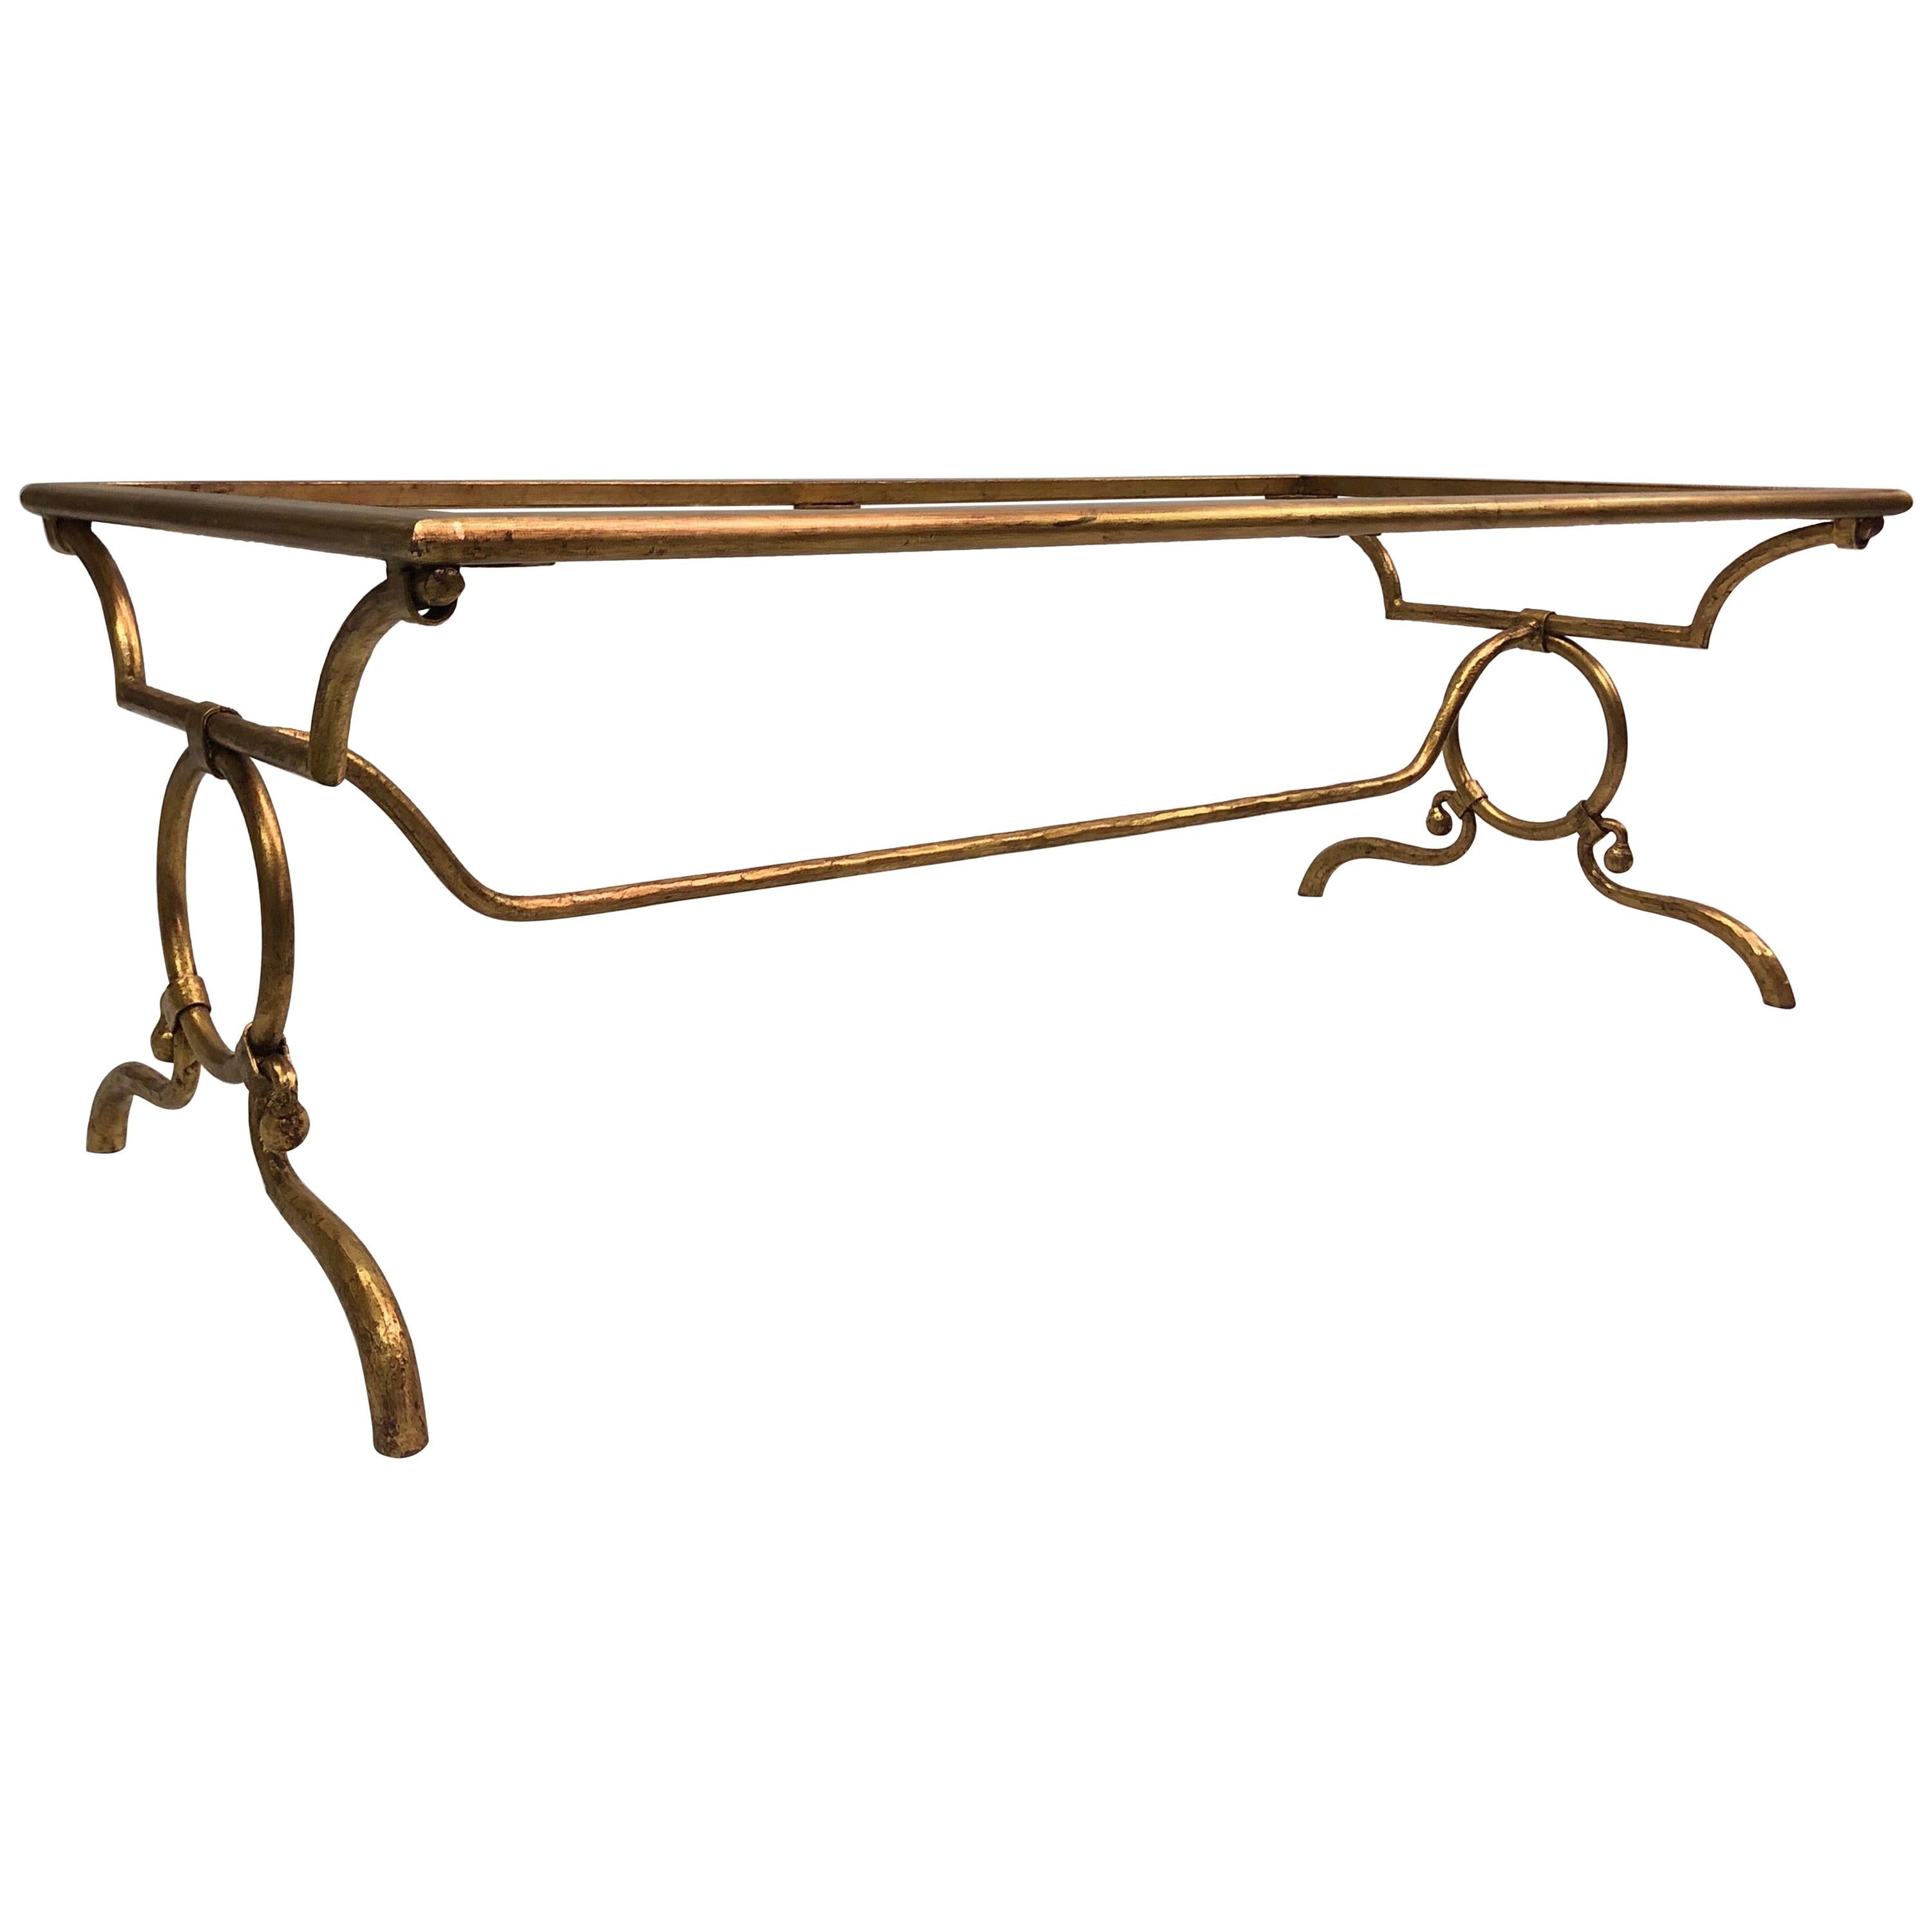 Italian Modern Neoclassical Gilt Iron Coffee Table by Giovanni Banci for Hermès For Sale